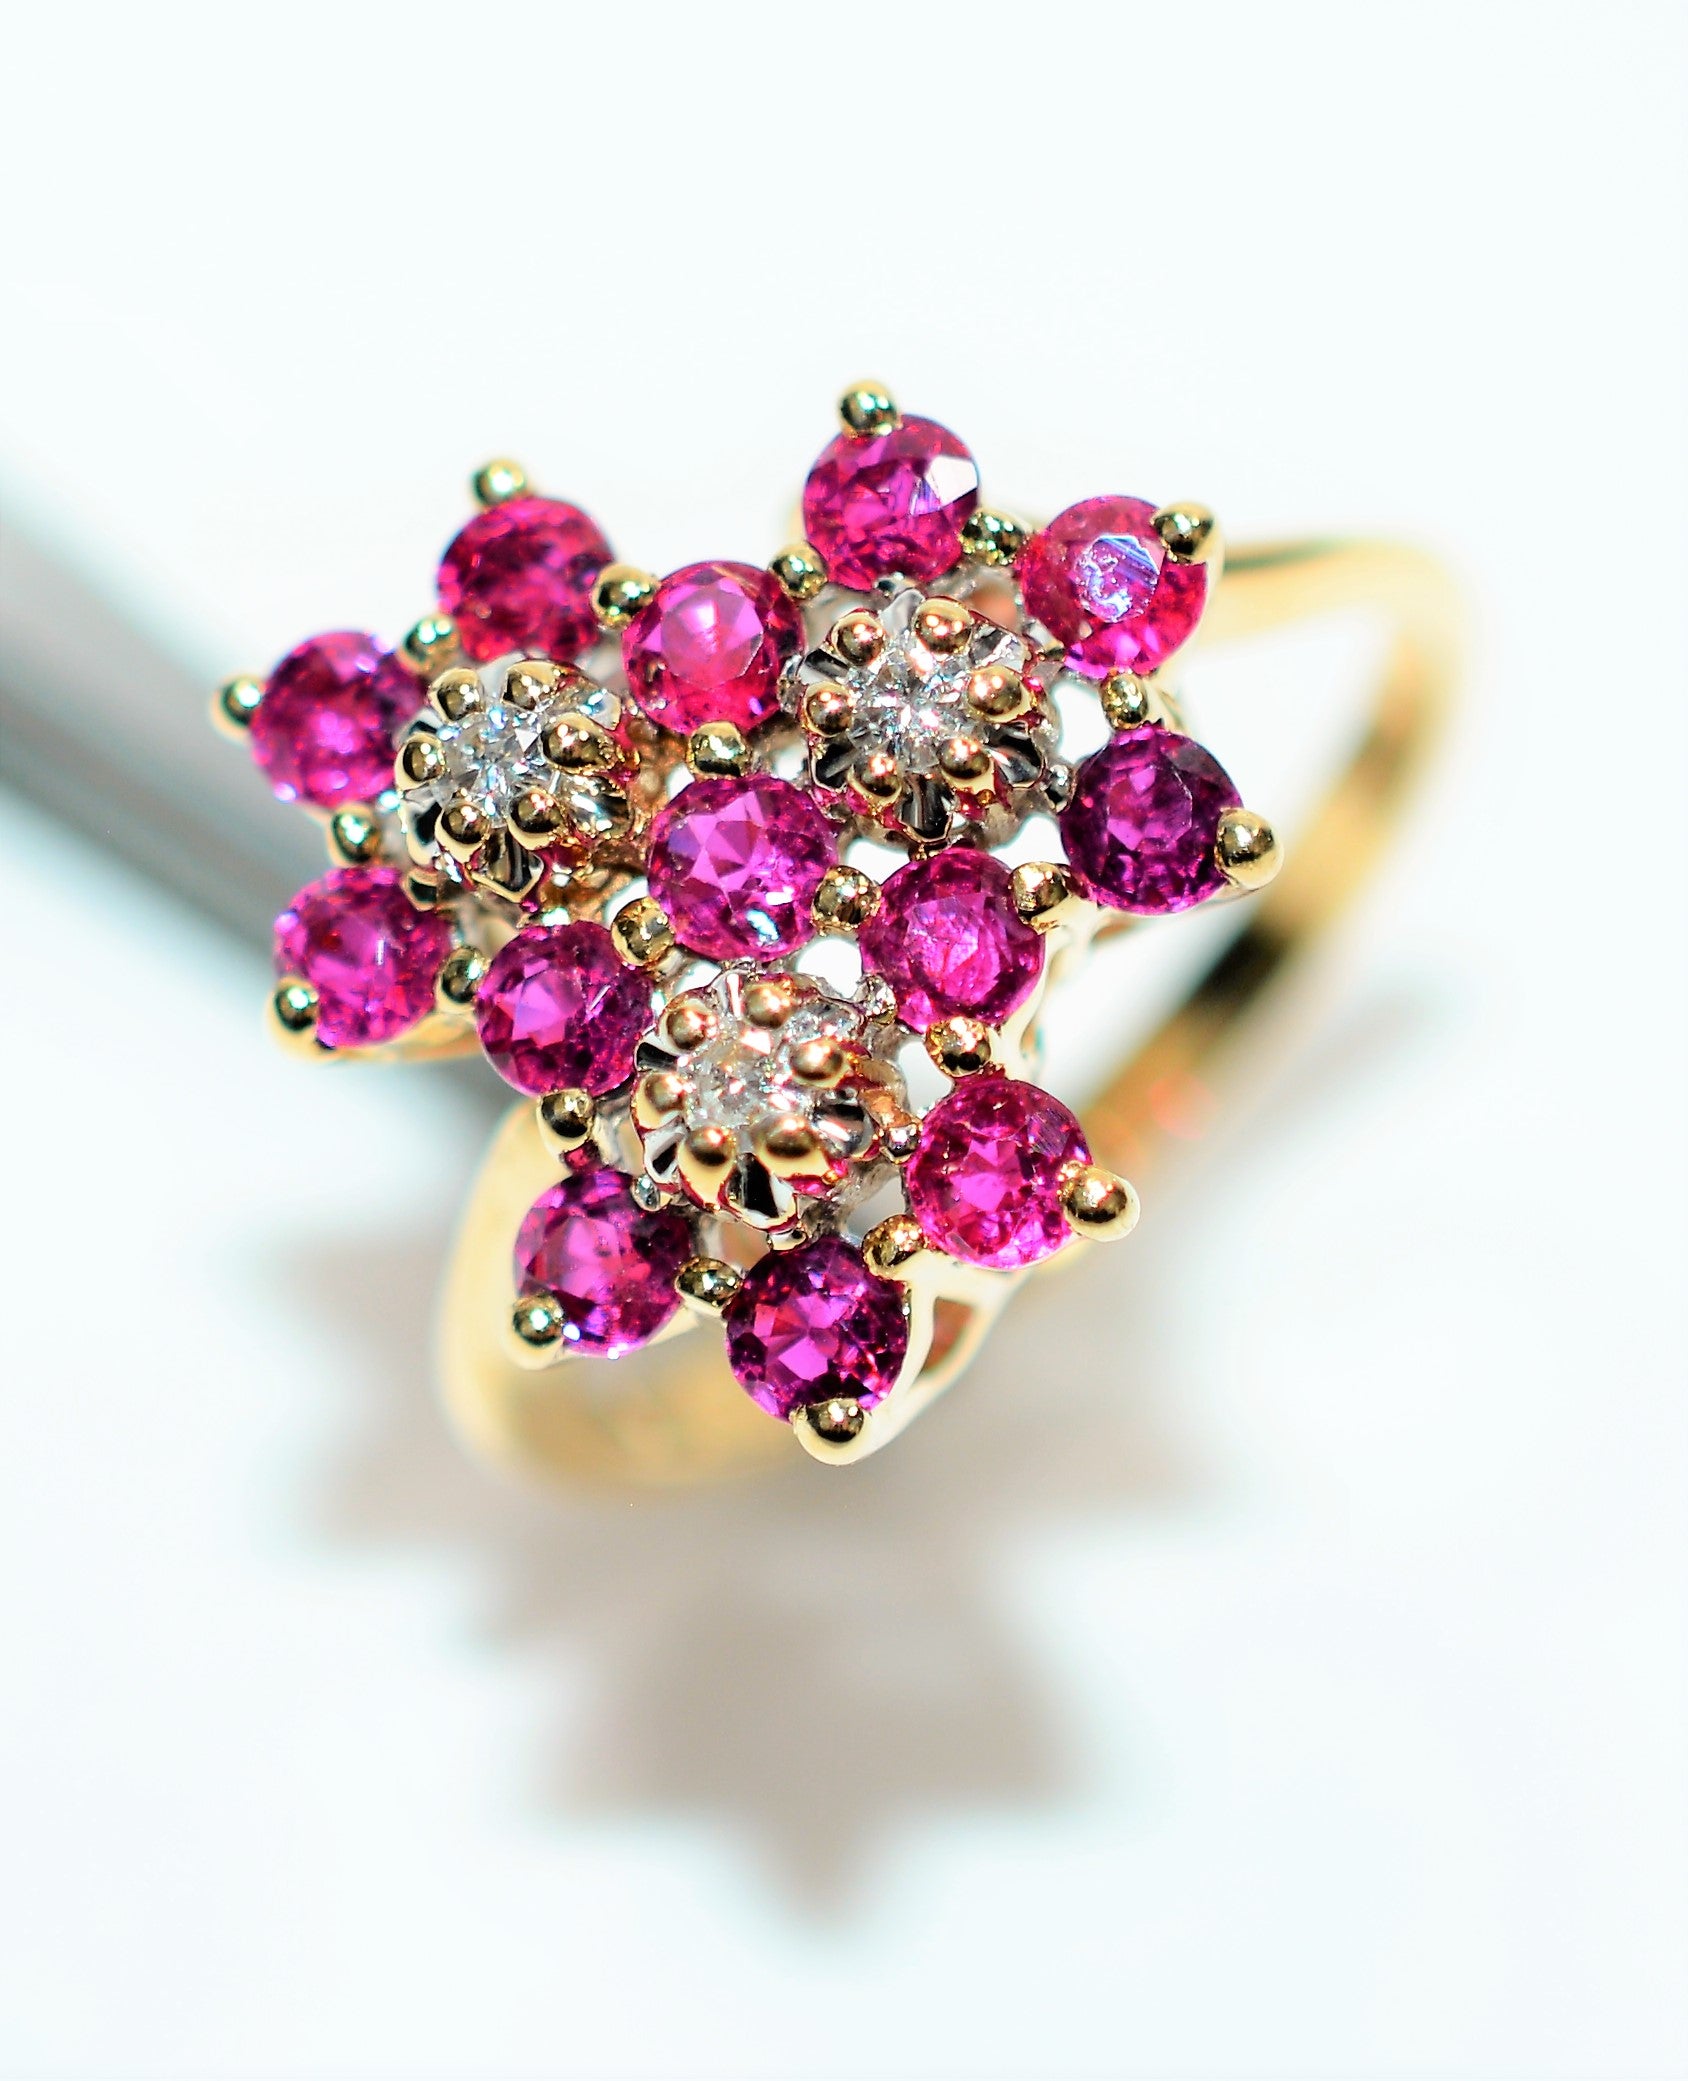 Natural Ruby & Diamond Ring 14K Solid Gold .87tcw Ruby Ring Flower Ring Ladies Ring Gemstone Ring Cluster Ring  Womens Ring Red Ring Jewelry